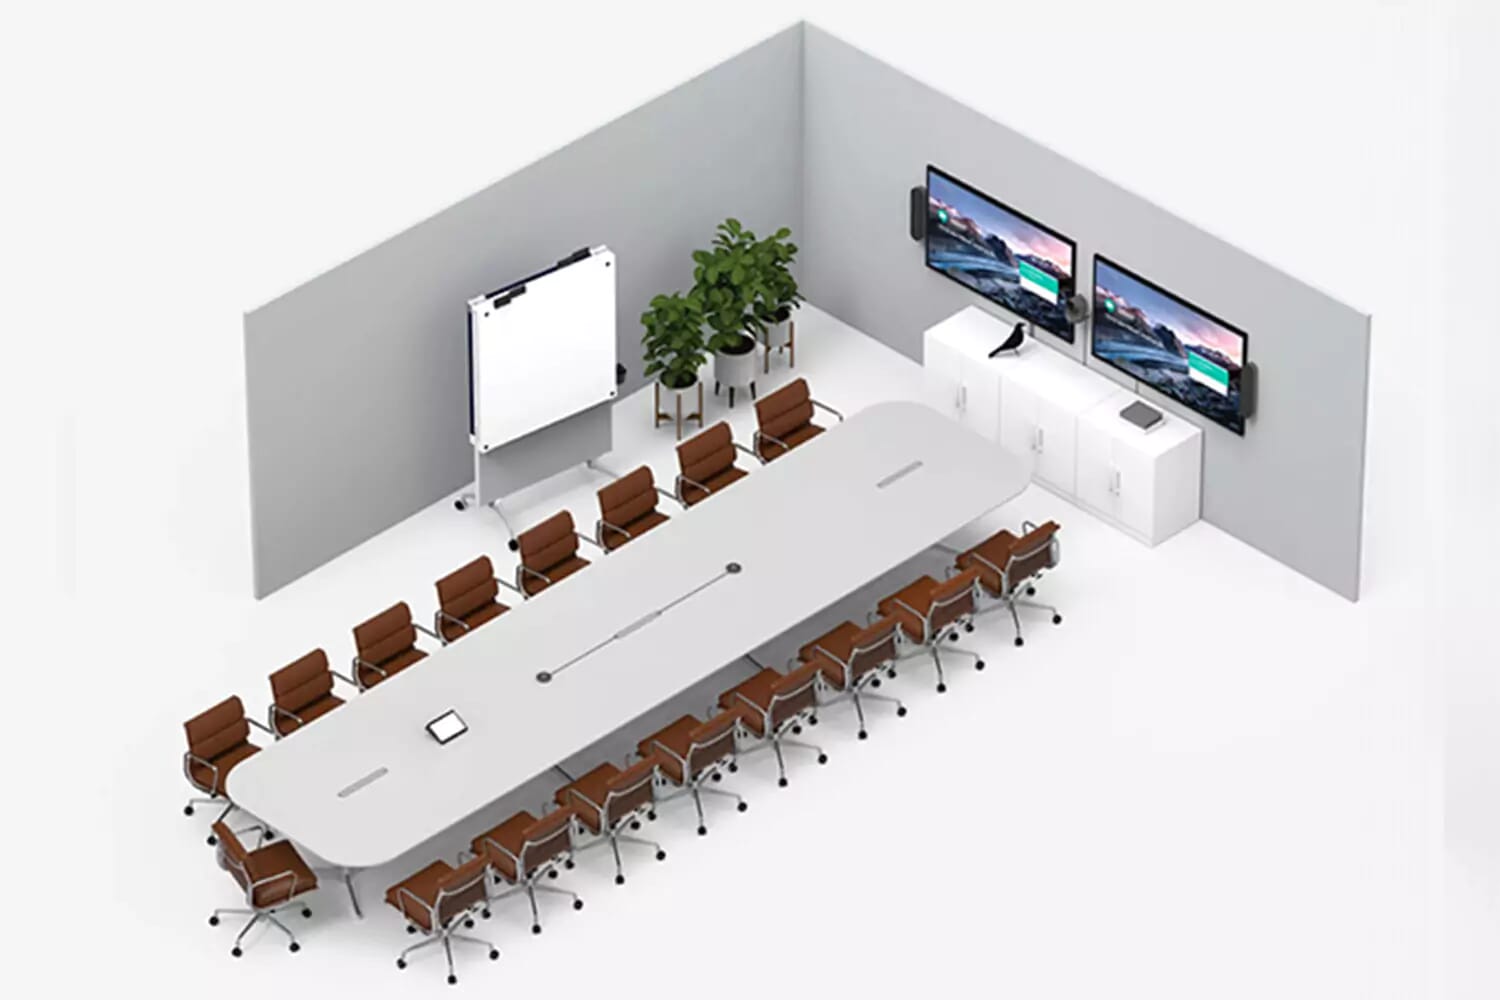 Large meeting room solutions